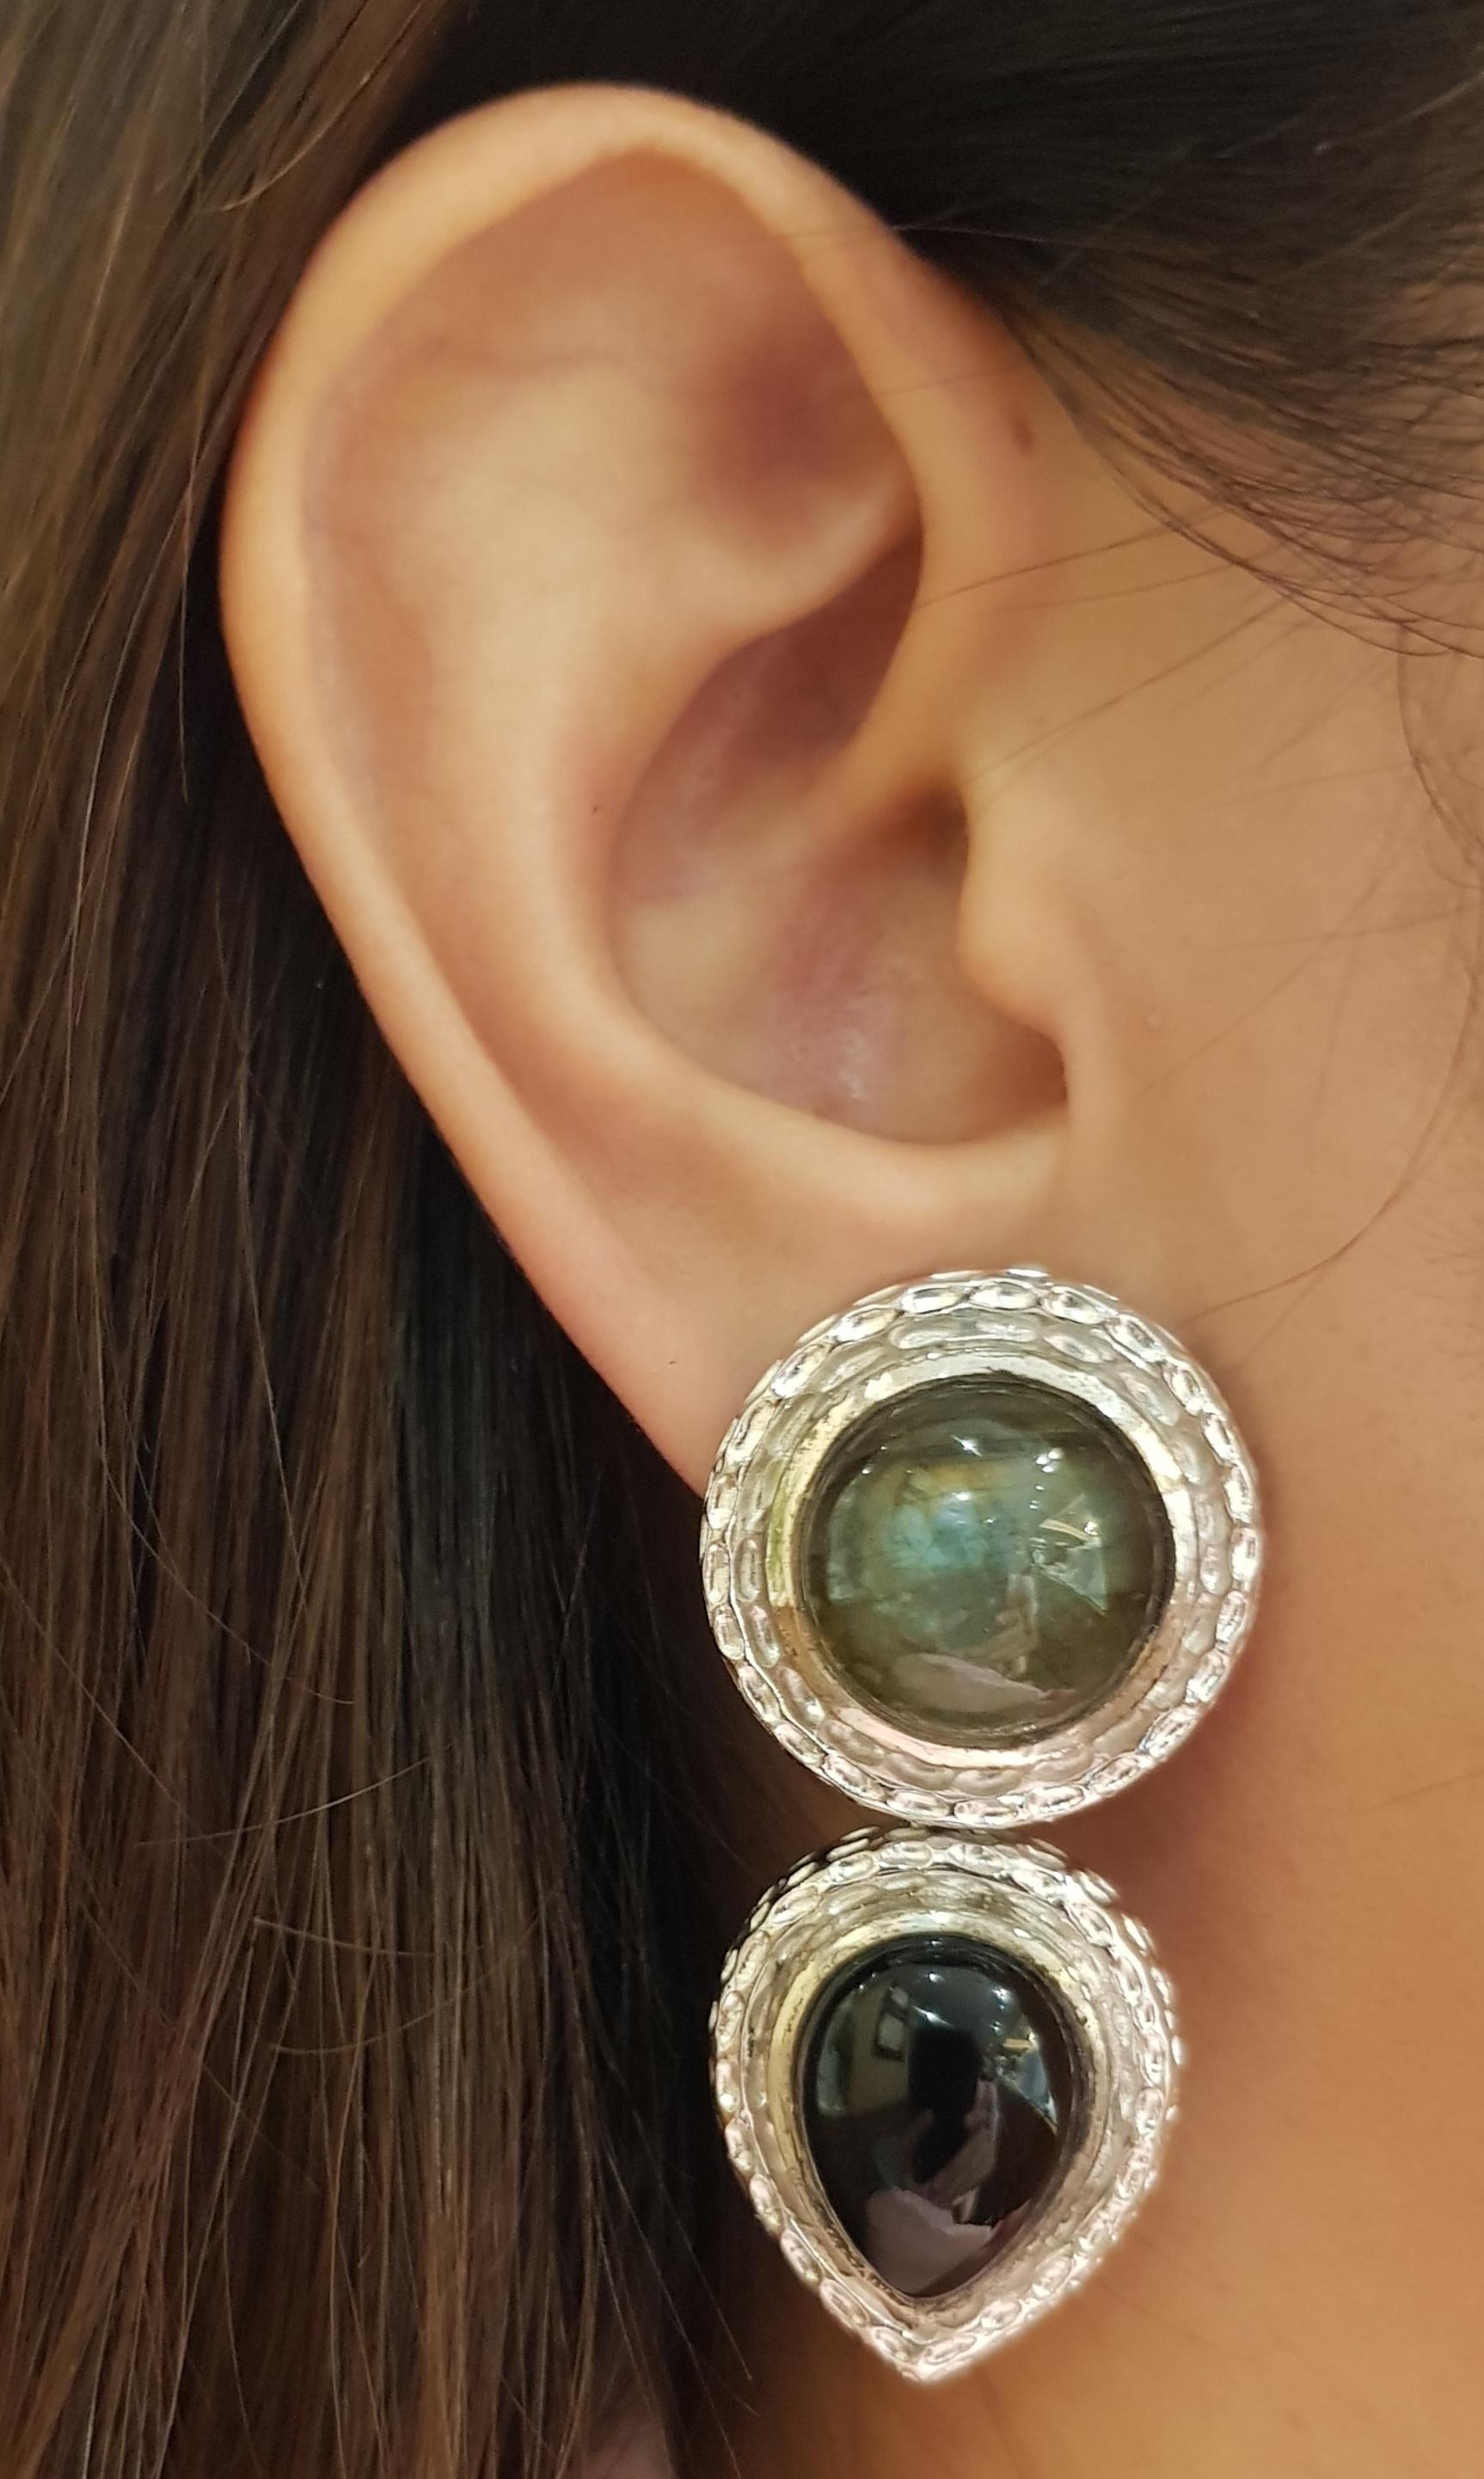 Labradorite and Onyx Earrings set in Silver Settings

Width: 2.4 cm 
Length: 4.7 cm
Total Weight:  34.2 grams

*Please note that the silver setting is plated with rhodium to promote shine and help prevent oxidation.  However, with the nature of